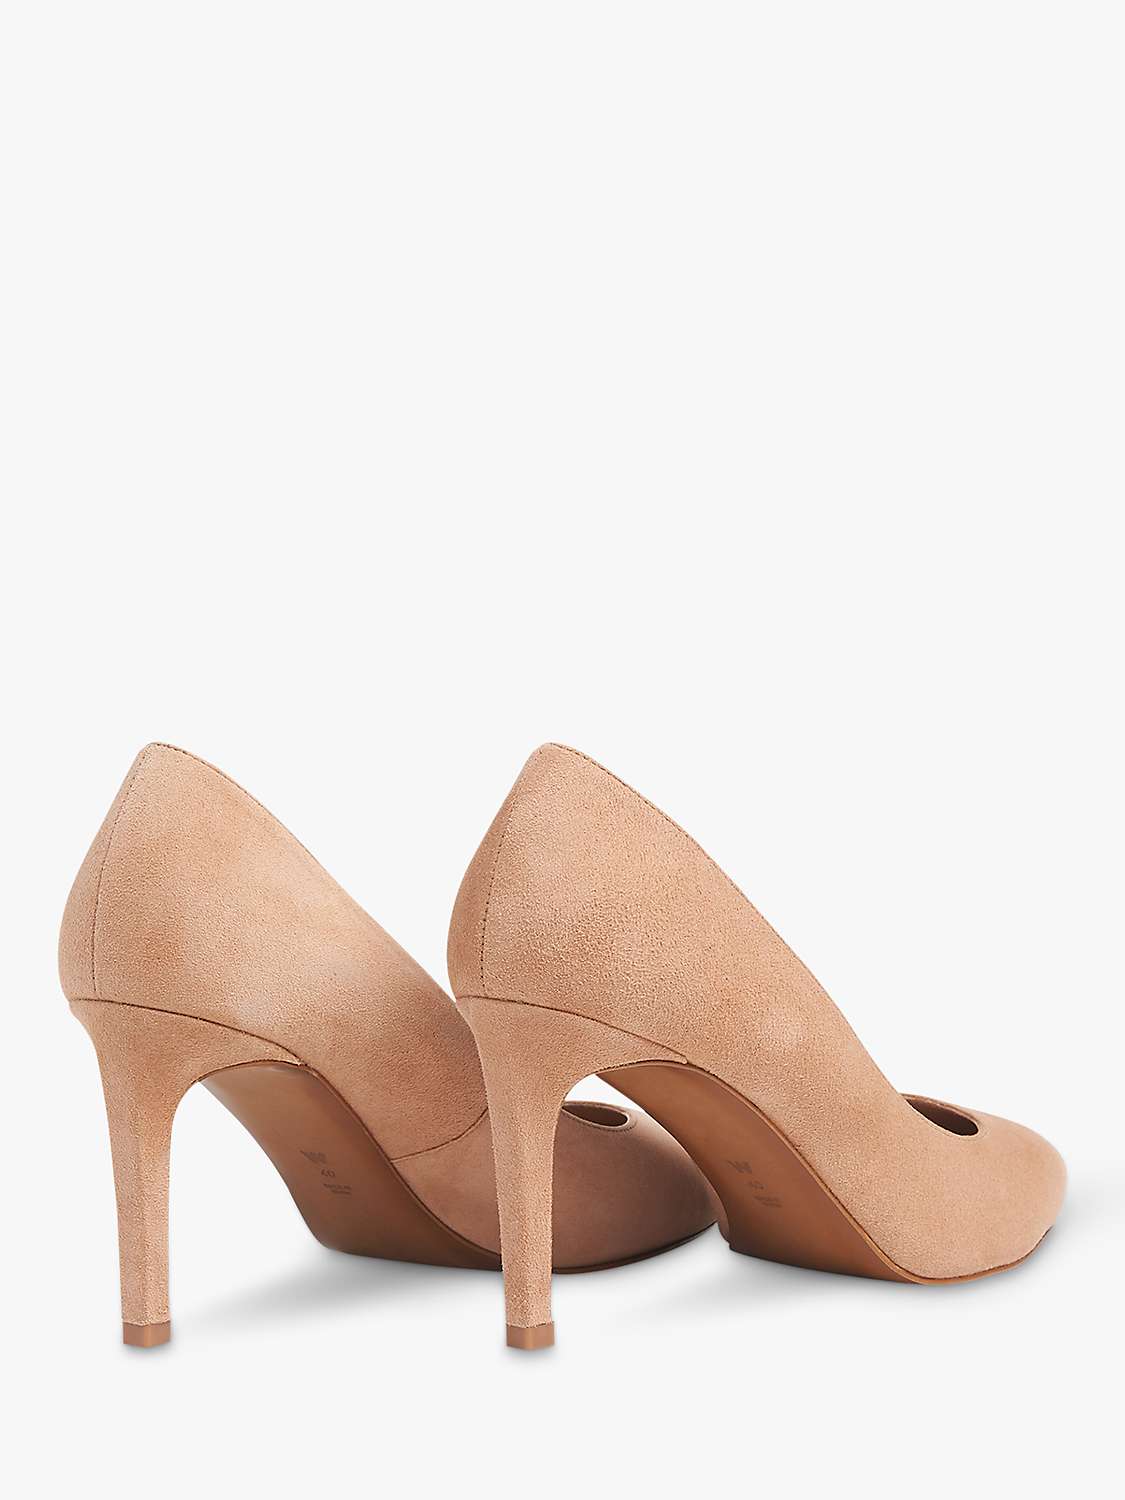 Buy Whistles Cari Suede Stiletto Heel Court Shoes, Nude Online at johnlewis.com